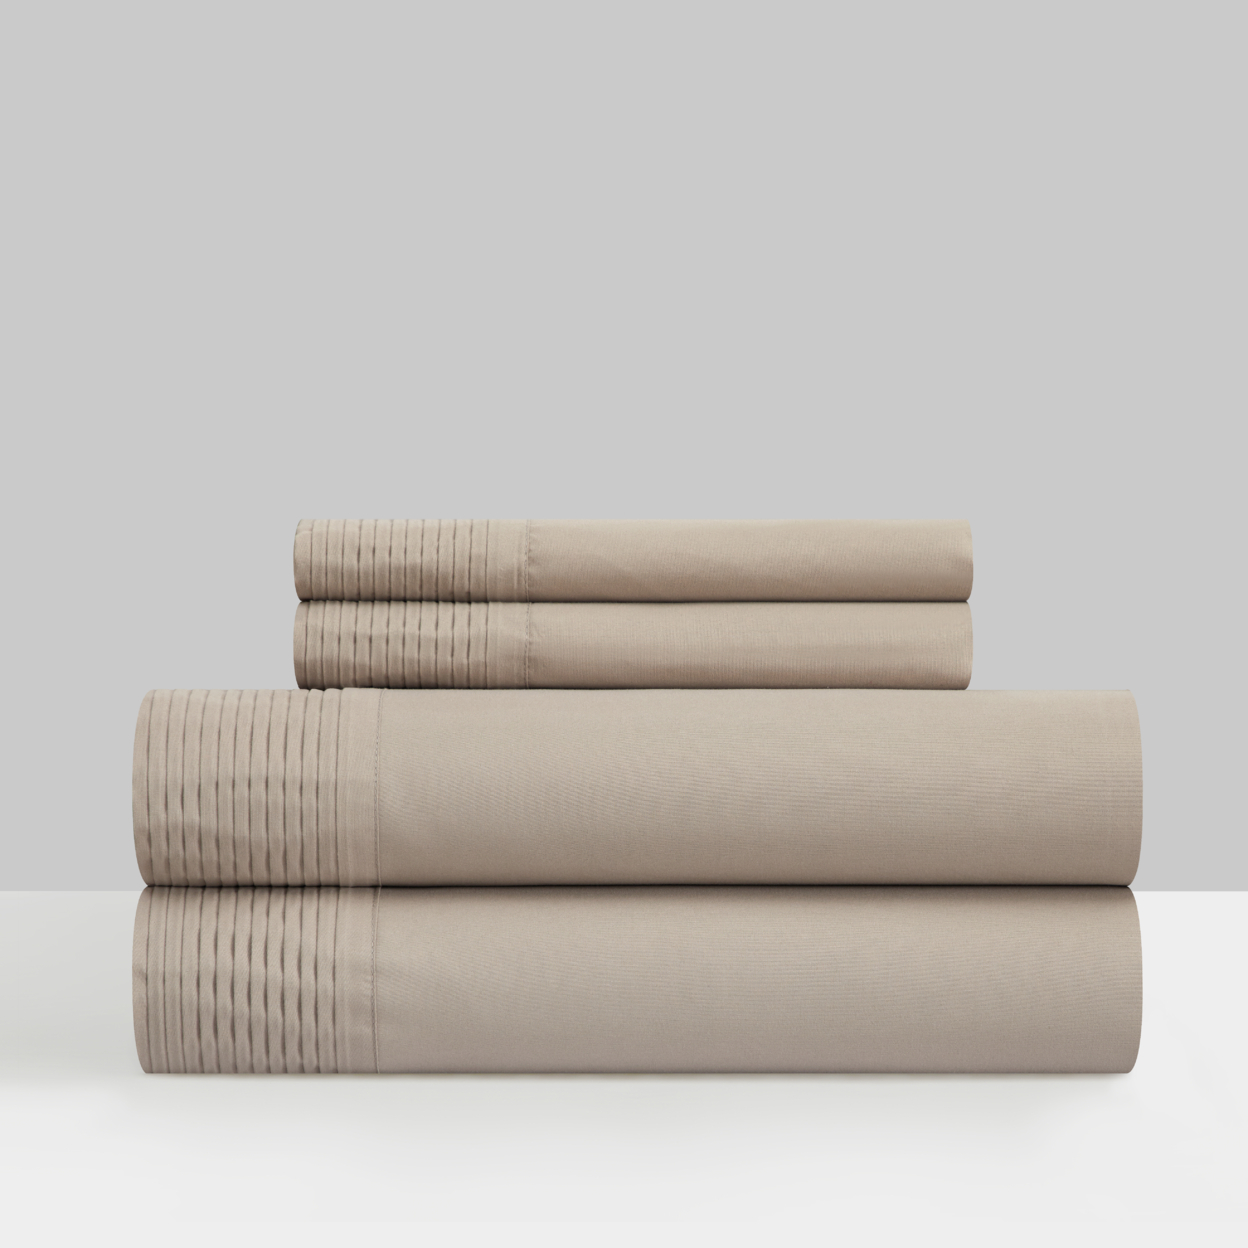 Barley 3 Or 4 Piece Sheet Set Solid Color With Pleated Details - Taupe, King